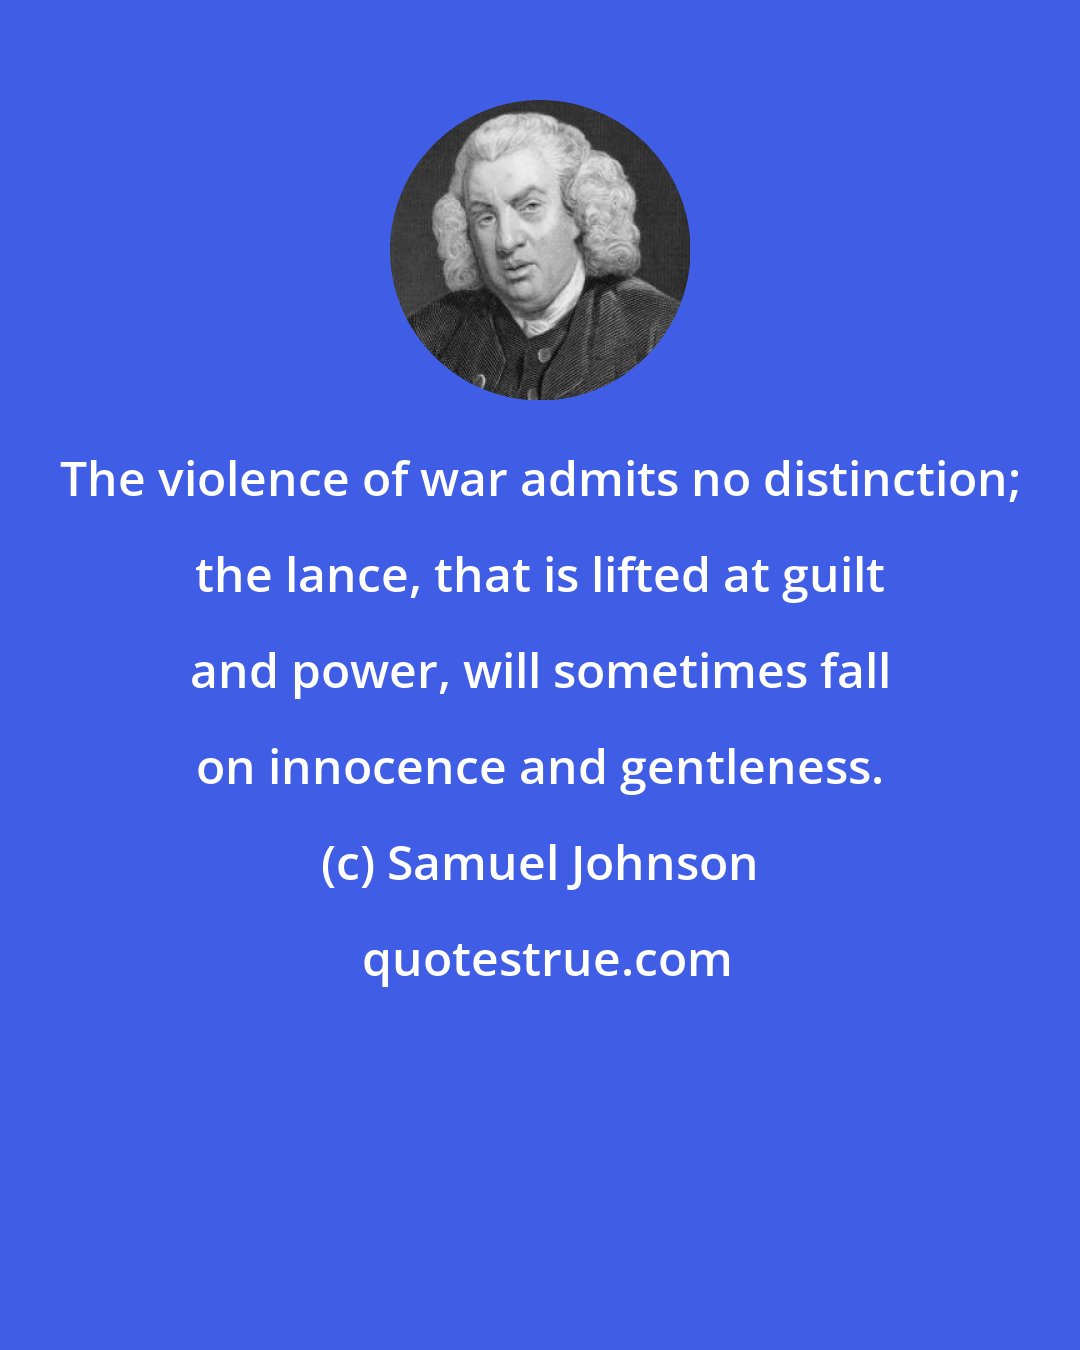 Samuel Johnson: The violence of war admits no distinction; the lance, that is lifted at guilt and power, will sometimes fall on innocence and gentleness.